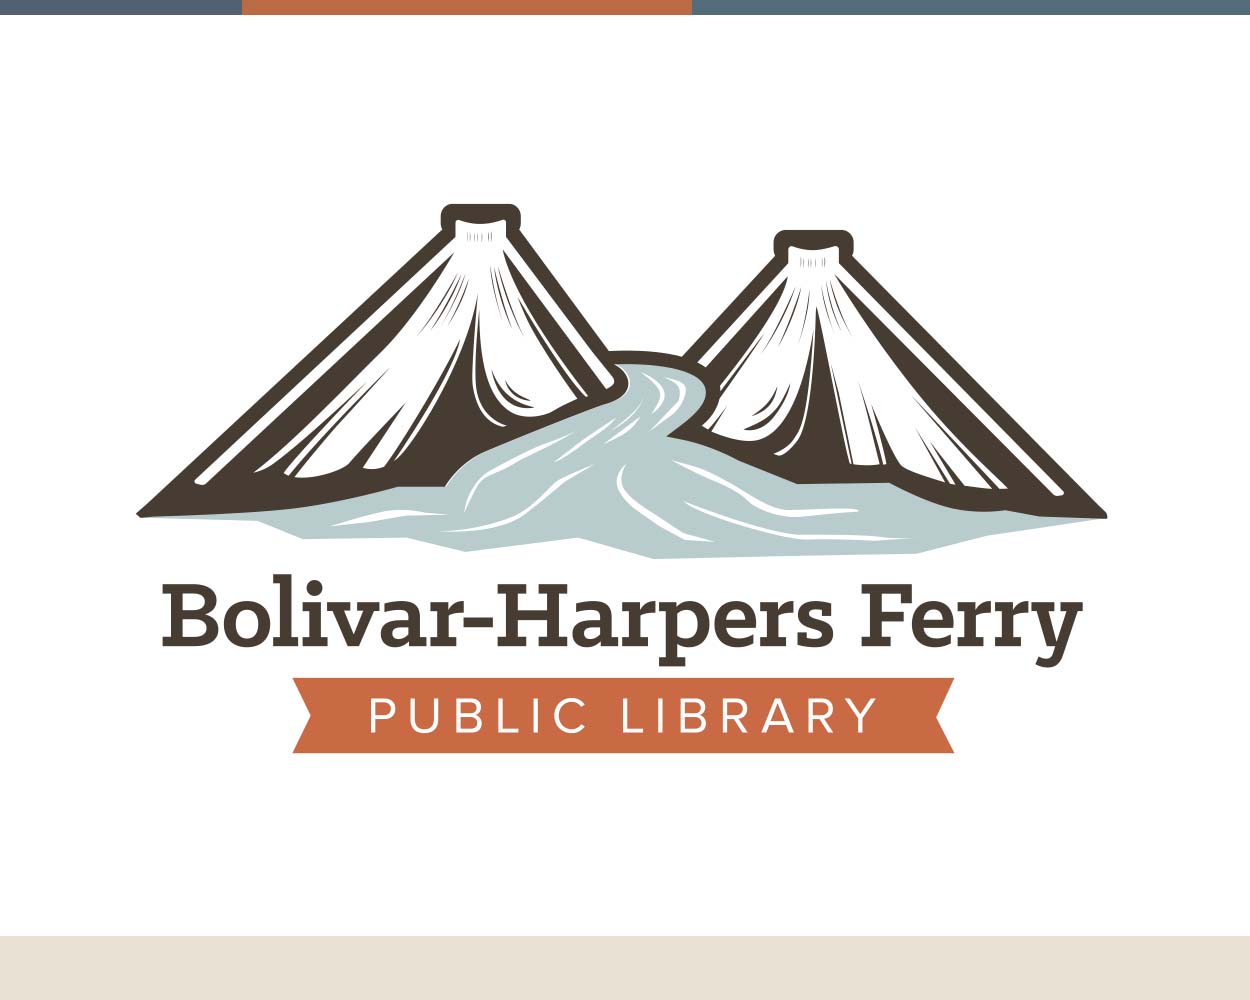 Bolivar-Harpers Ferry Public Library